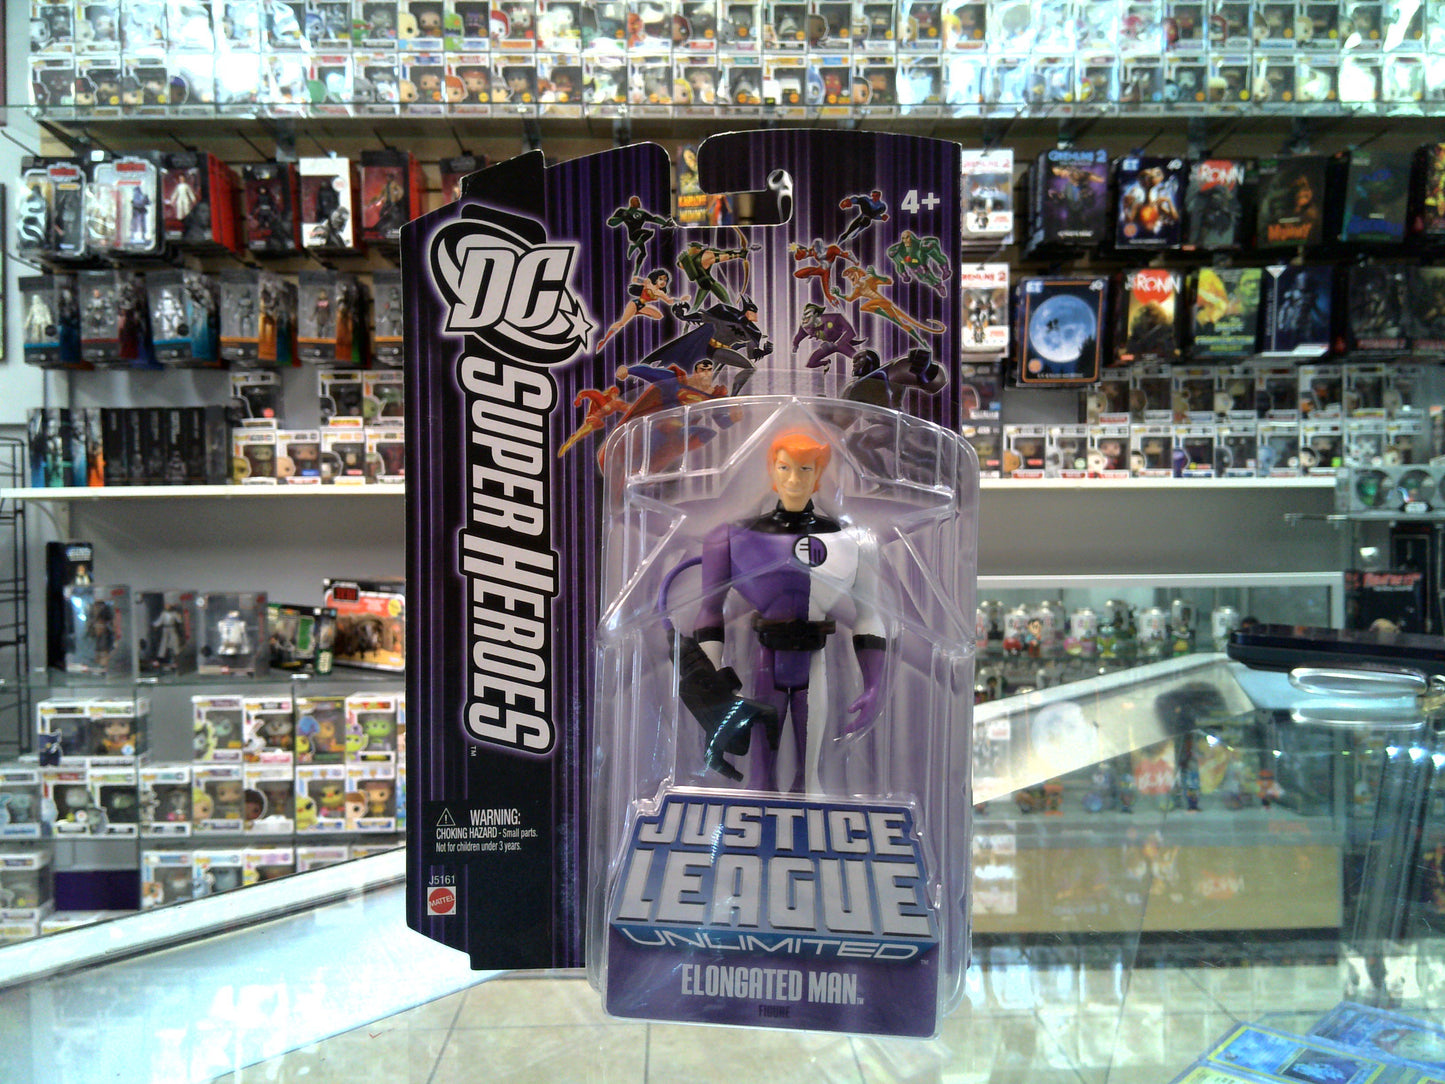 DC Super Heroes Justice League Unlimited - Elongated Man - 3.75in figure